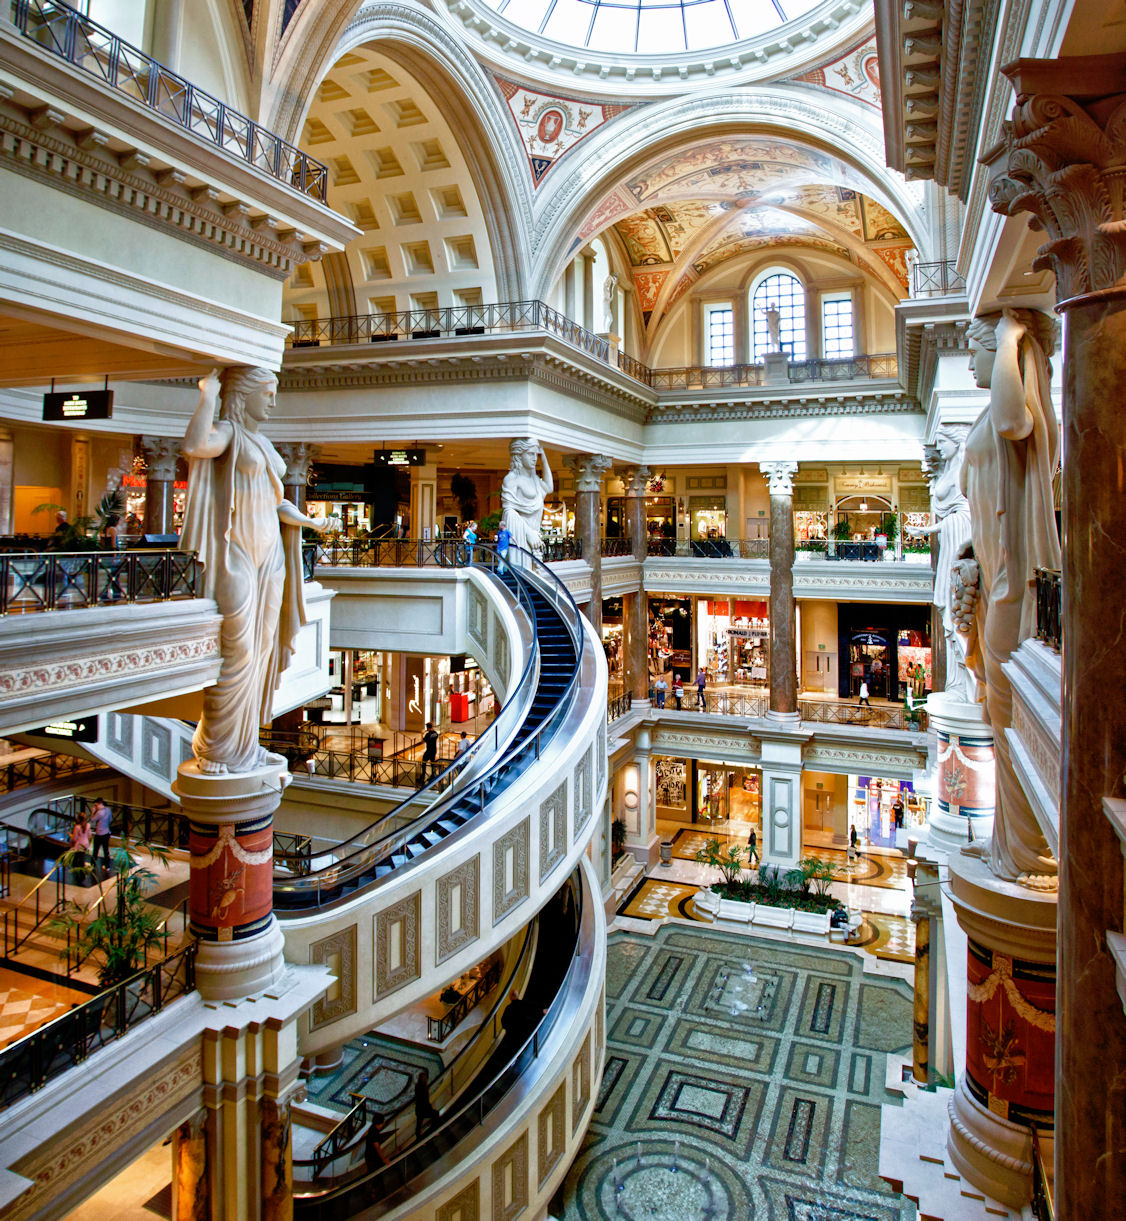 About The Forum Shops at Caesars Palace® - A Shopping Center in Las ...